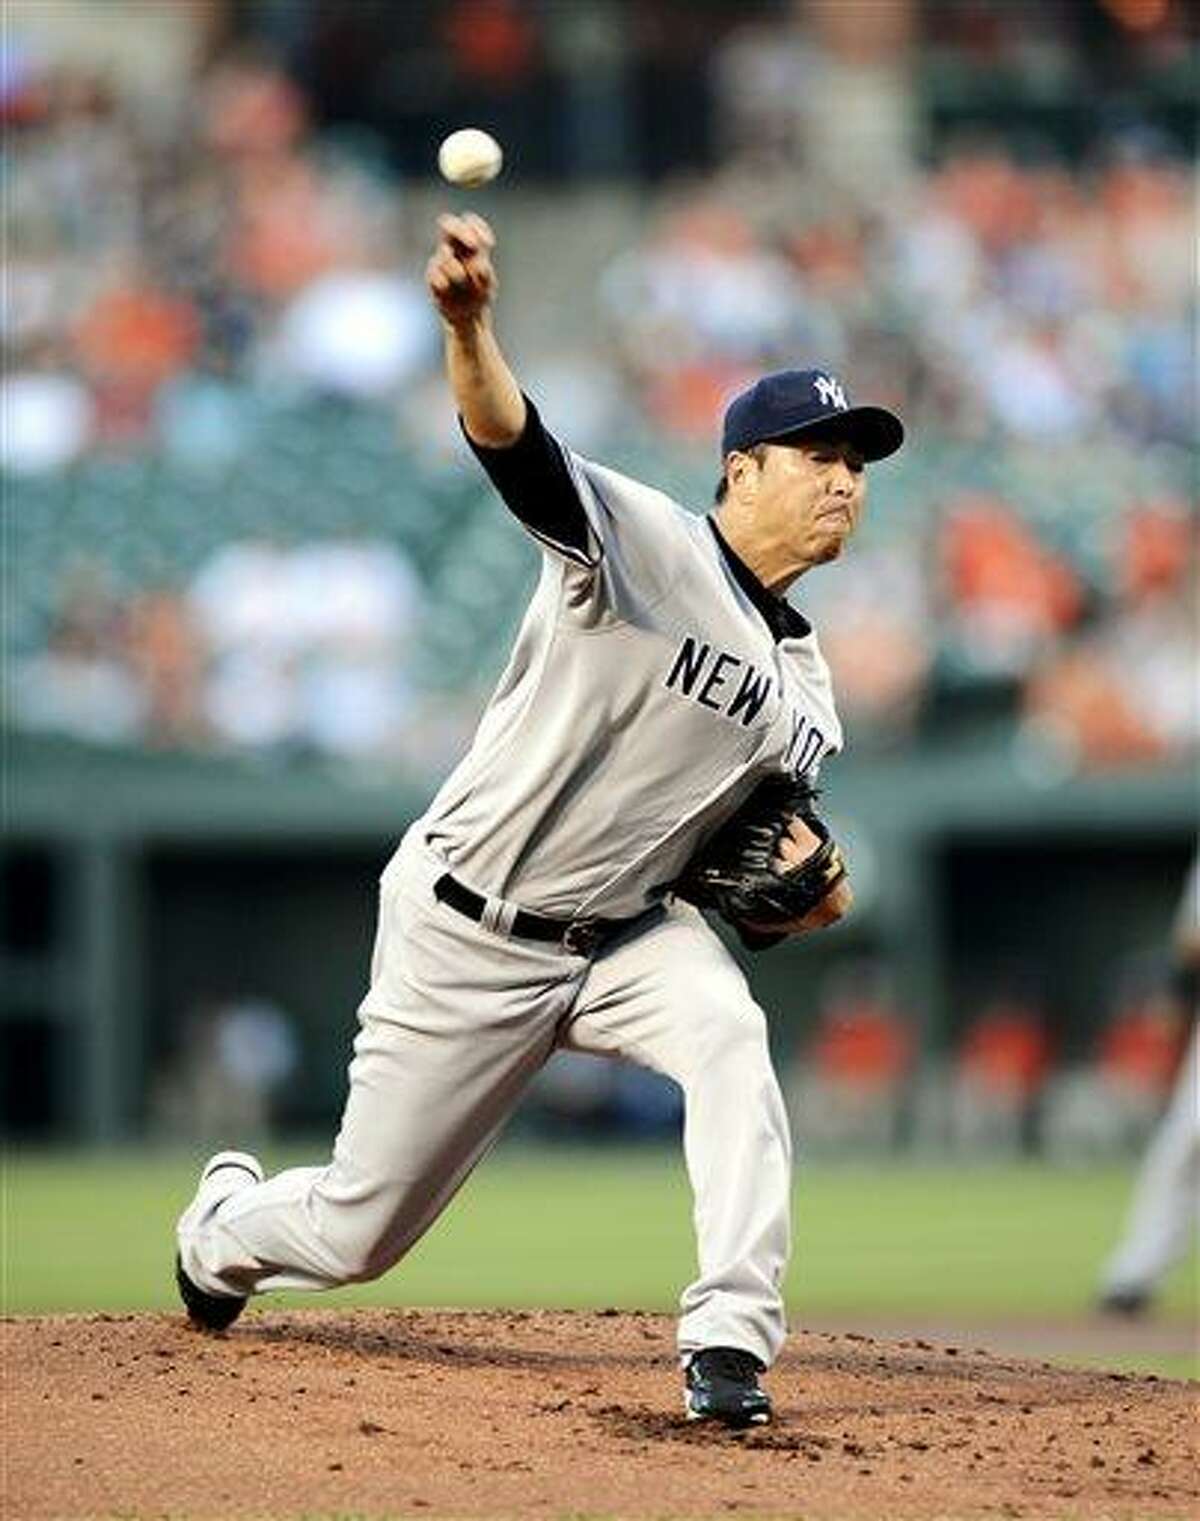 New York Yankees starting pitcher Hiroki Kuroda, of Japan, delivers against the Baltimore Orioles during the first inning of a baseball game, Wednesday, May 22, 2013, in Baltimore. (AP Photo/Nick Wass)